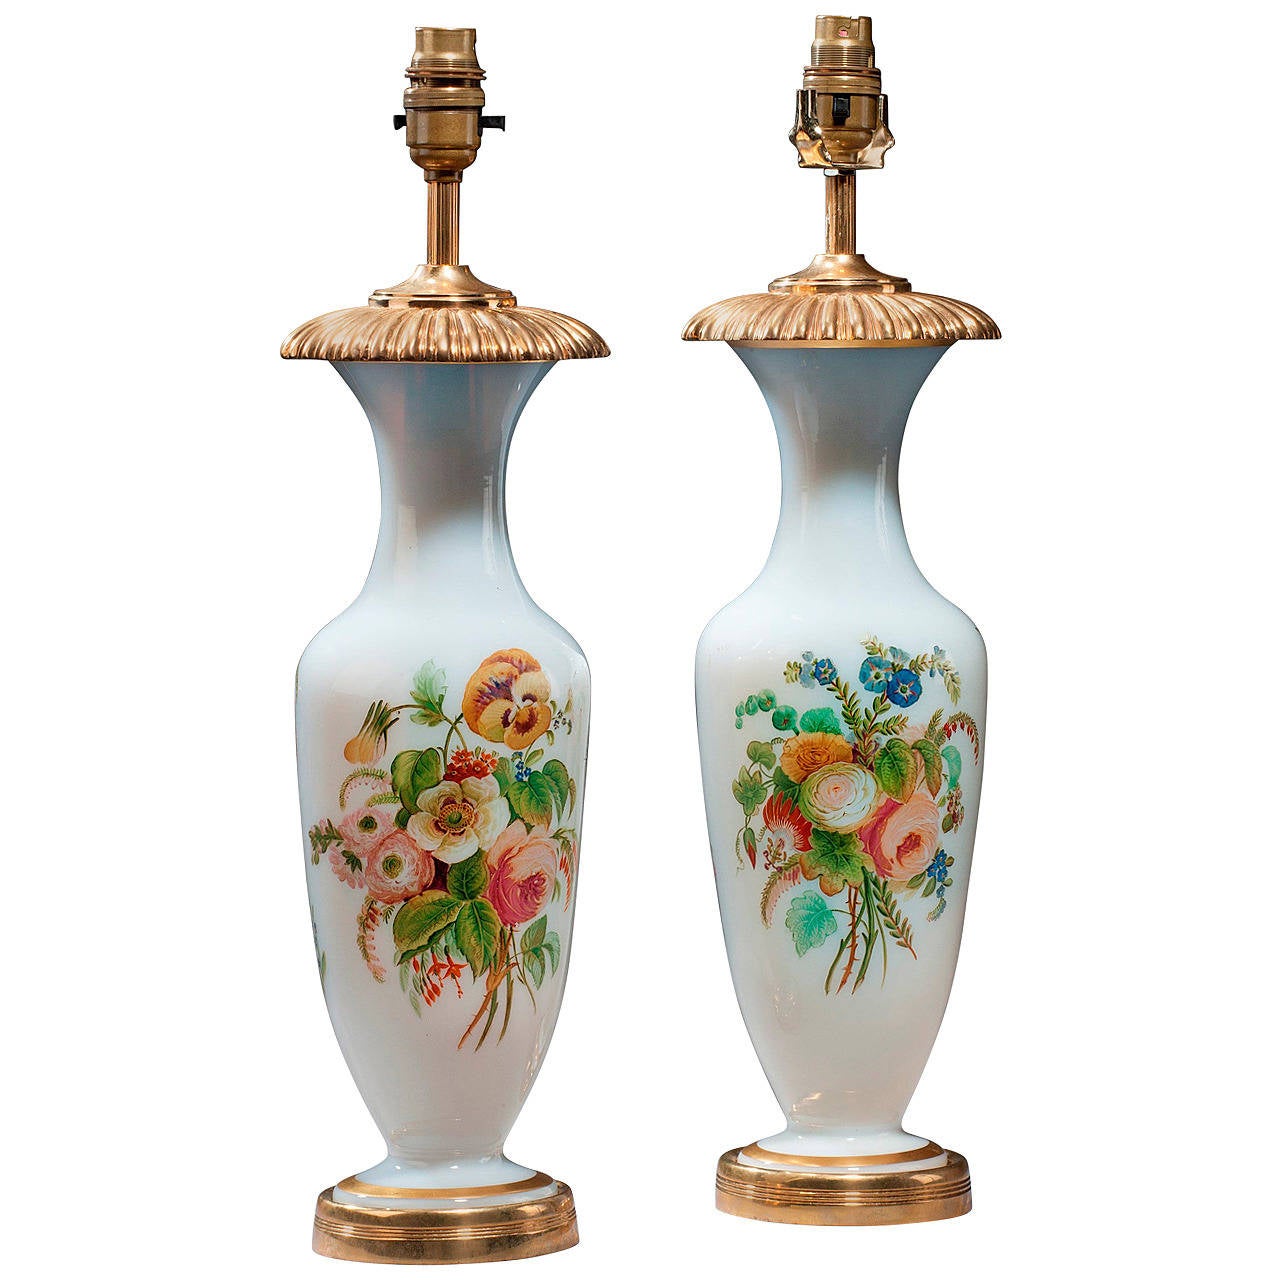 Pair of Early 20th Century French Opaline Lamps